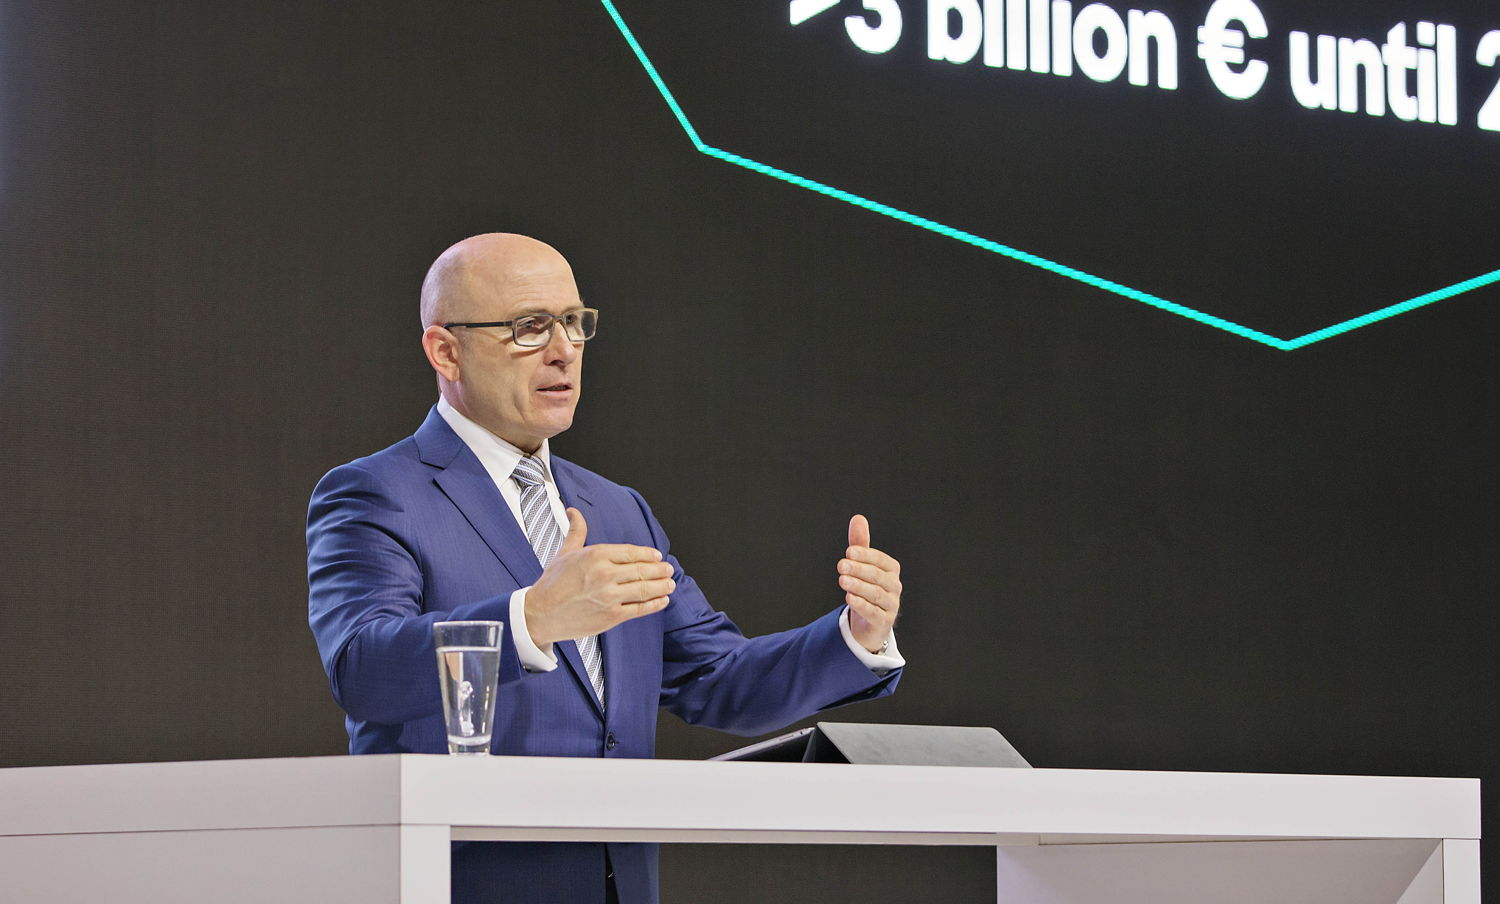 ŠKODA AUTO CEO Bernhard Maier presented information on 2018's balance sheet and gave an outlook on the company's future development at the car manufacturer's annual press conference in Mladá Boleslav today.